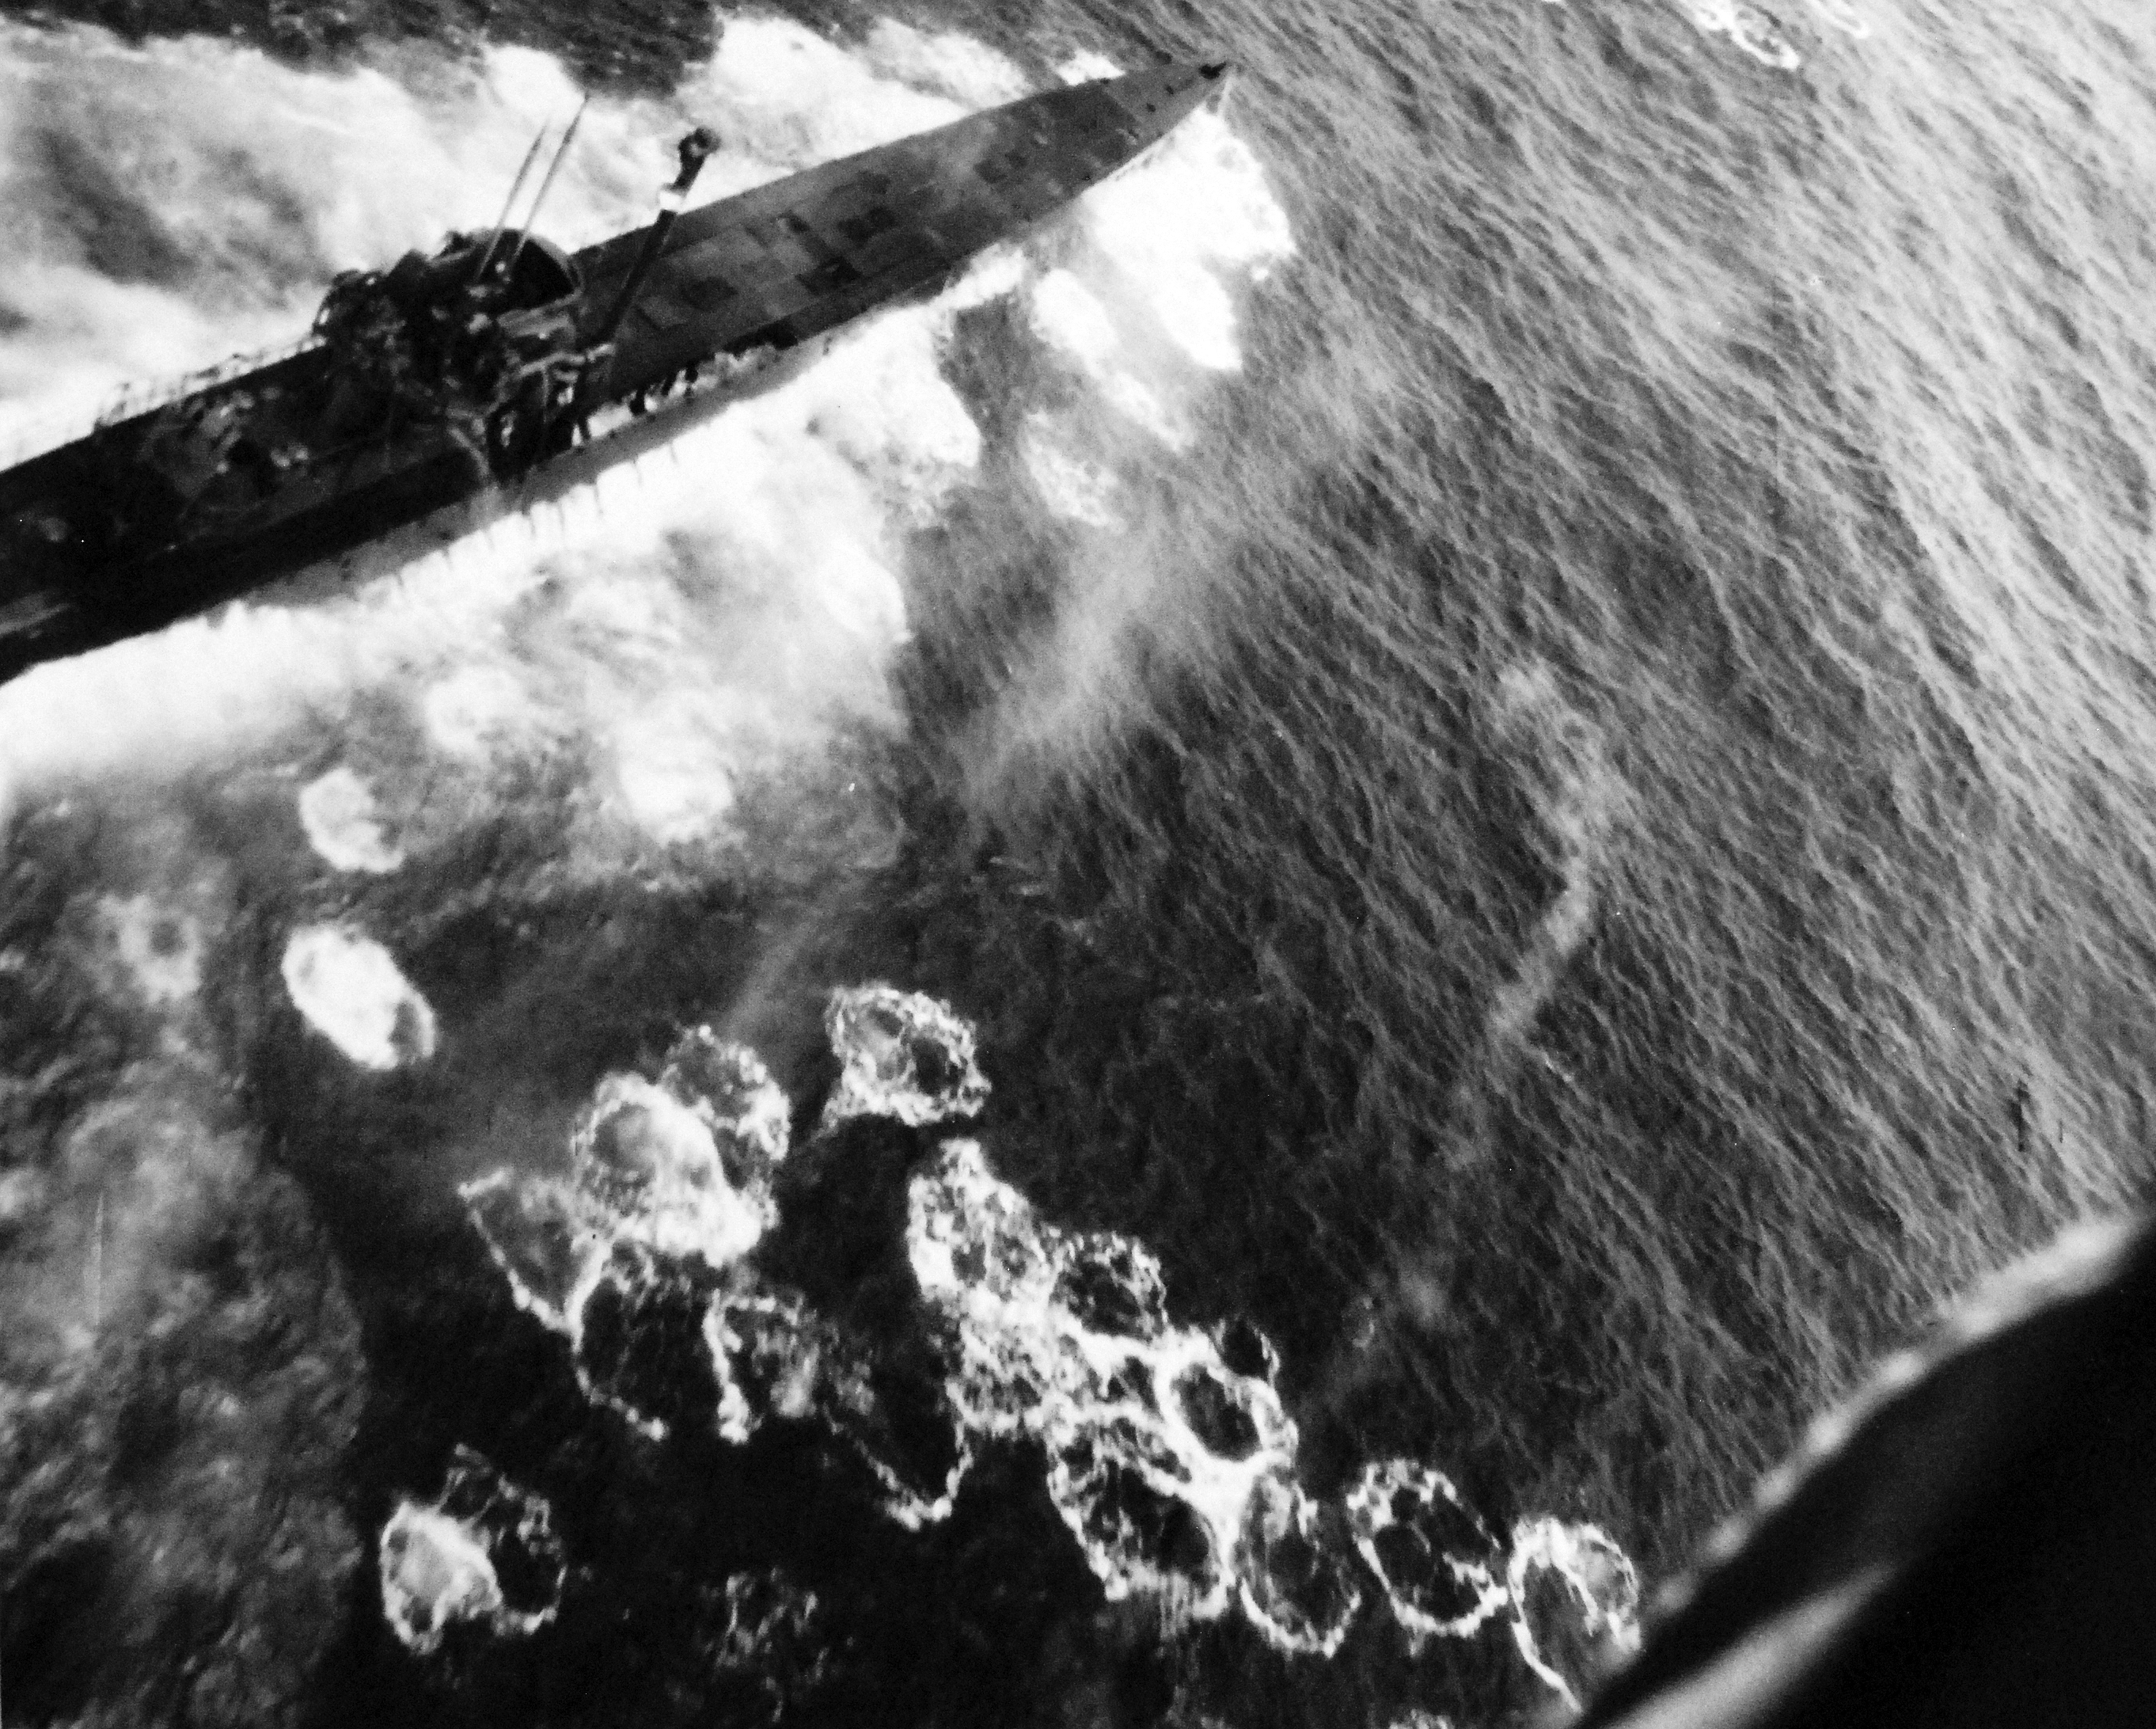 Air Attack on German submarine U-1229 by Lt(jg) Bernard Sissler flying from USS Bogue, 20 Aug 1944. The submarine was sunk with 18 killed and 41 surviving. Note the raised “Schnorkel” device.